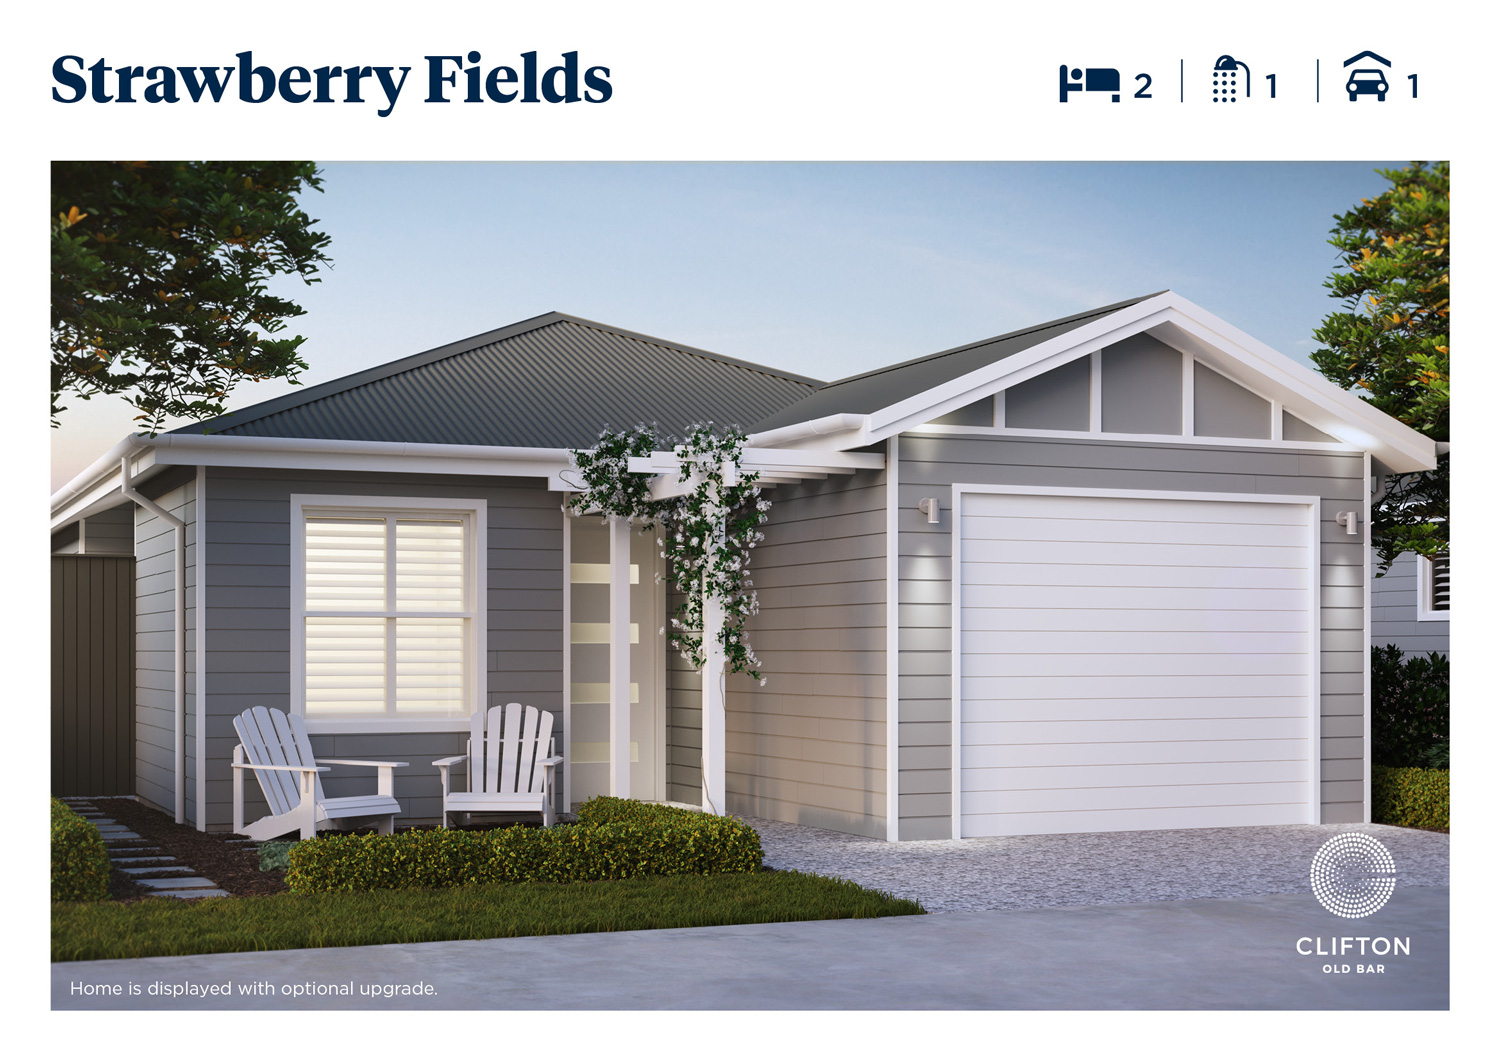 Strawberry Fields 2 bedroom home at Clifton Old Bar